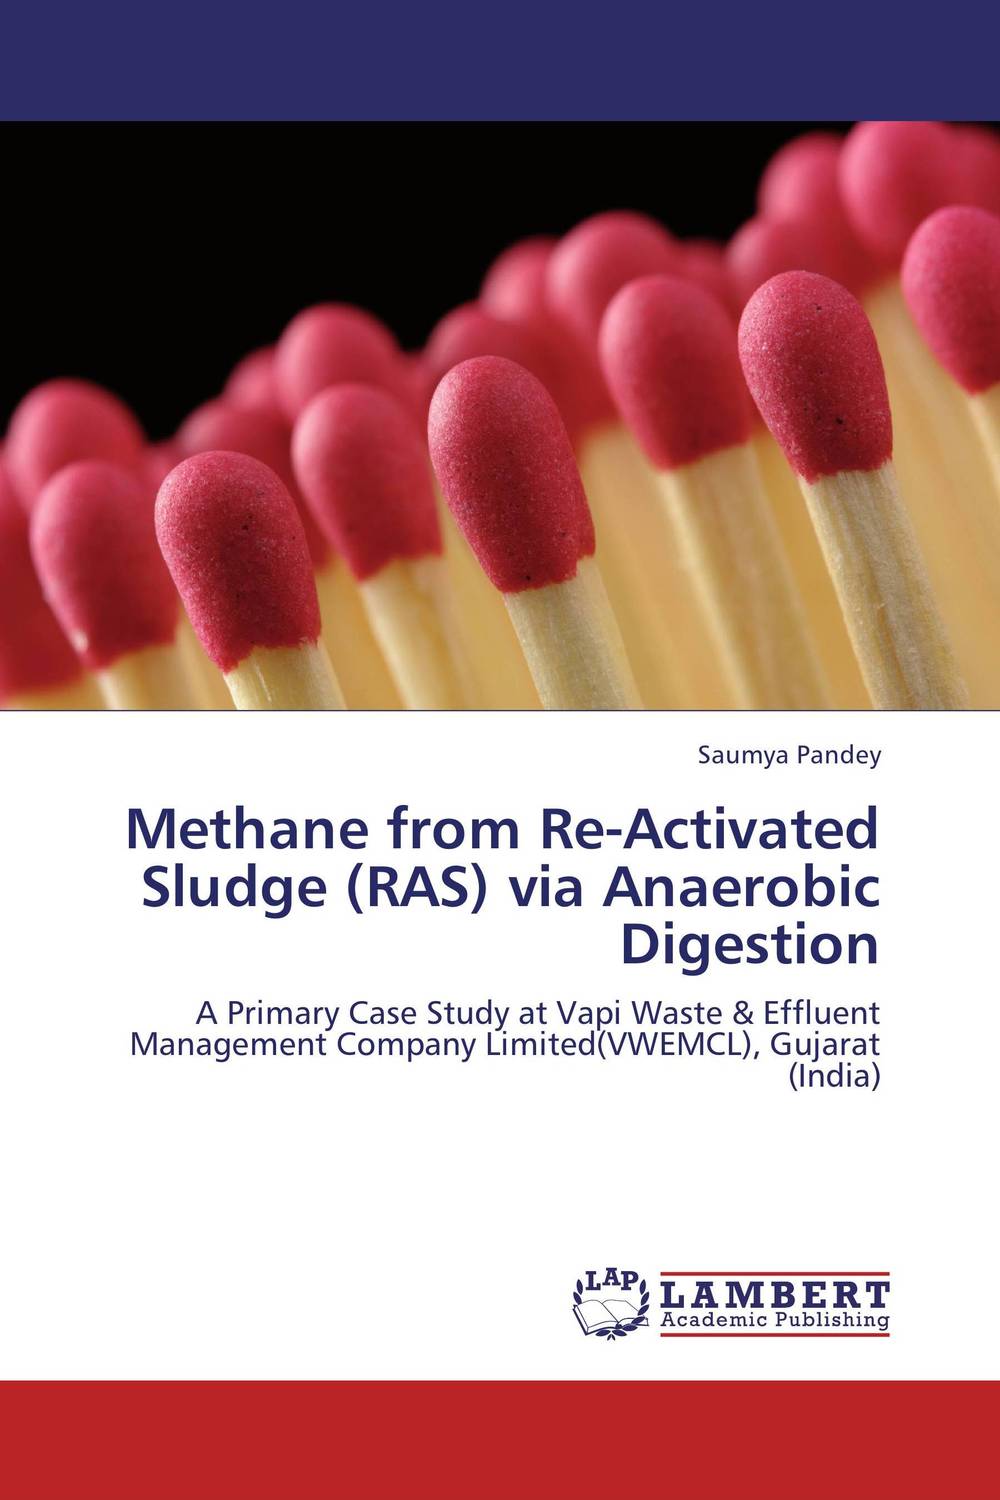 Methane from Re-Activated Sludge (RAS) via Anaerobic Digestion